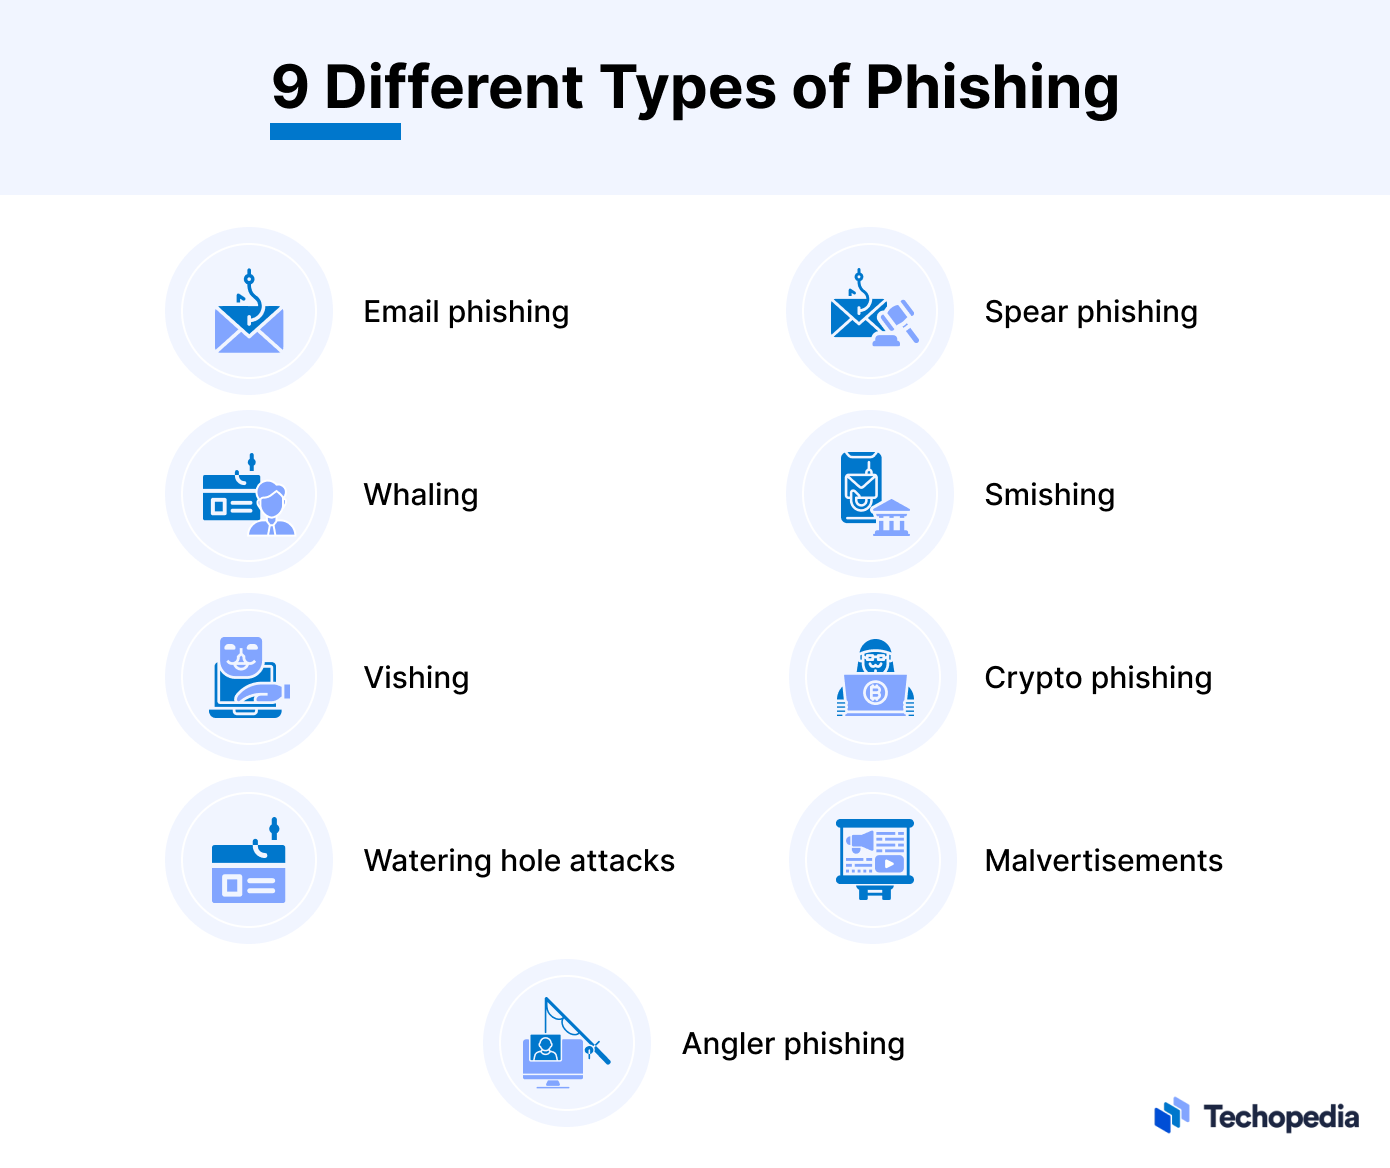 9 different types of phishing attack